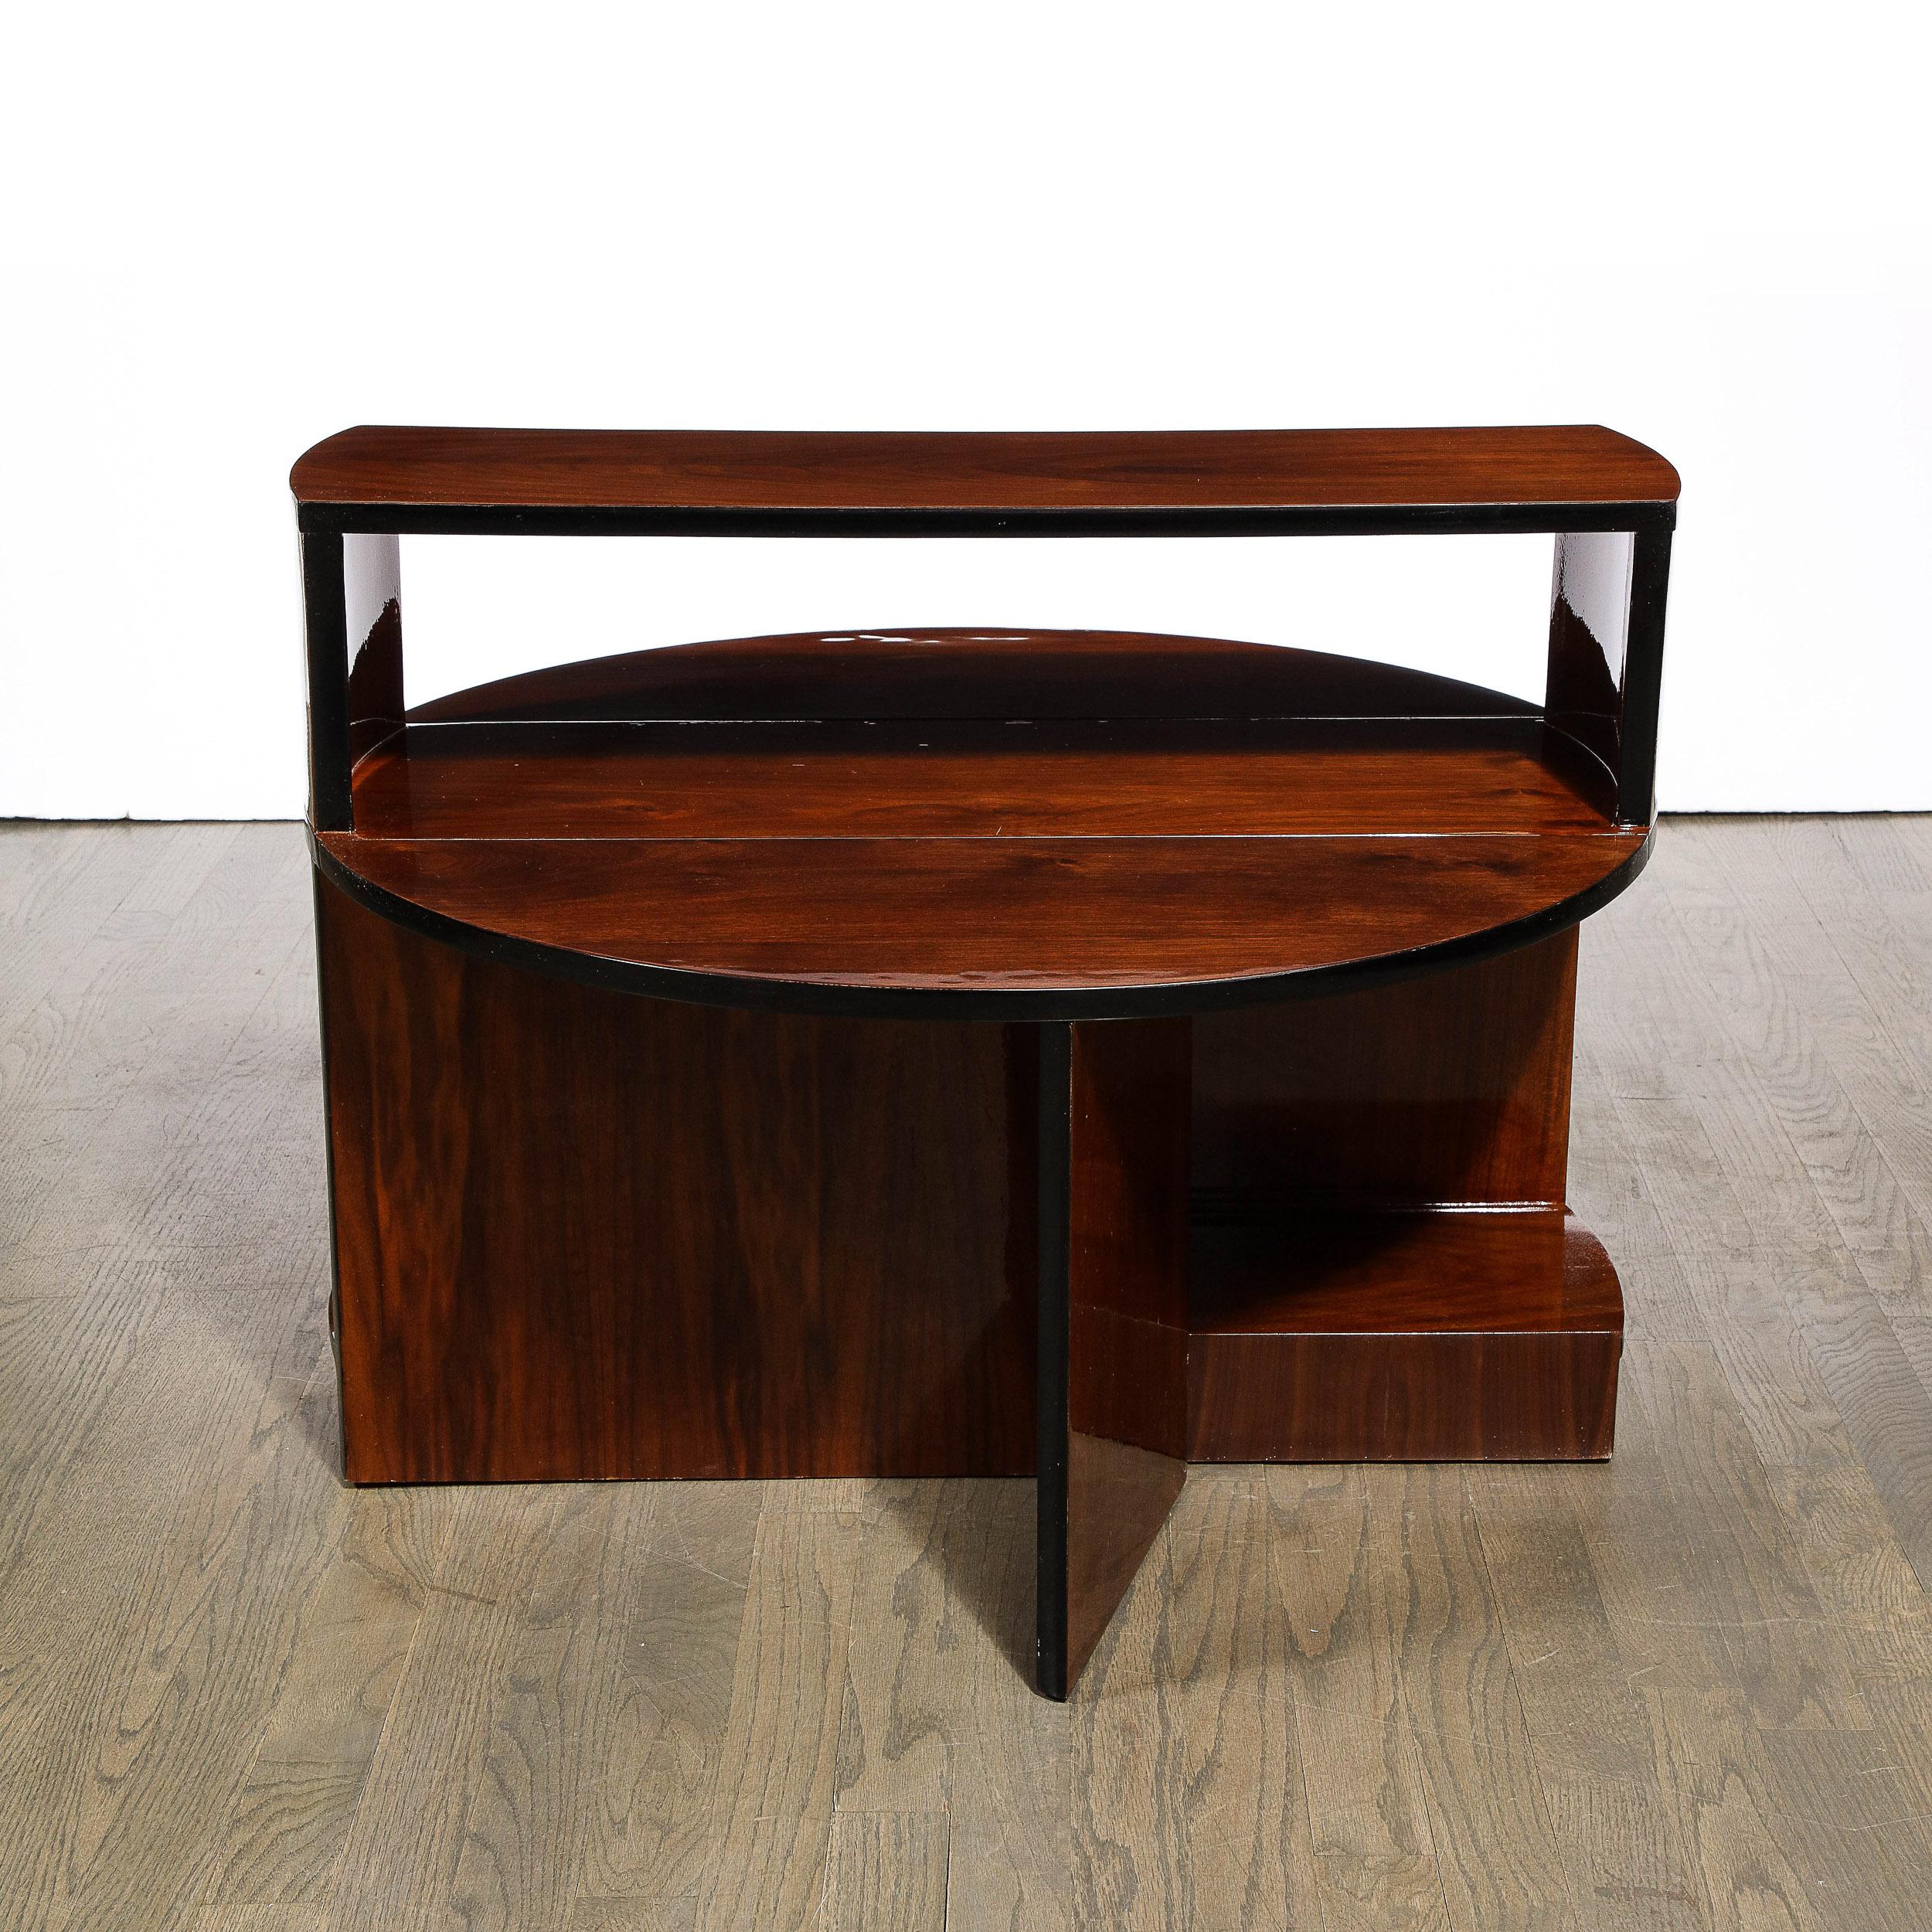 American Art Deco Machine Age Folding Coffee Table in Book-Matched Walnut & Black Lacquer